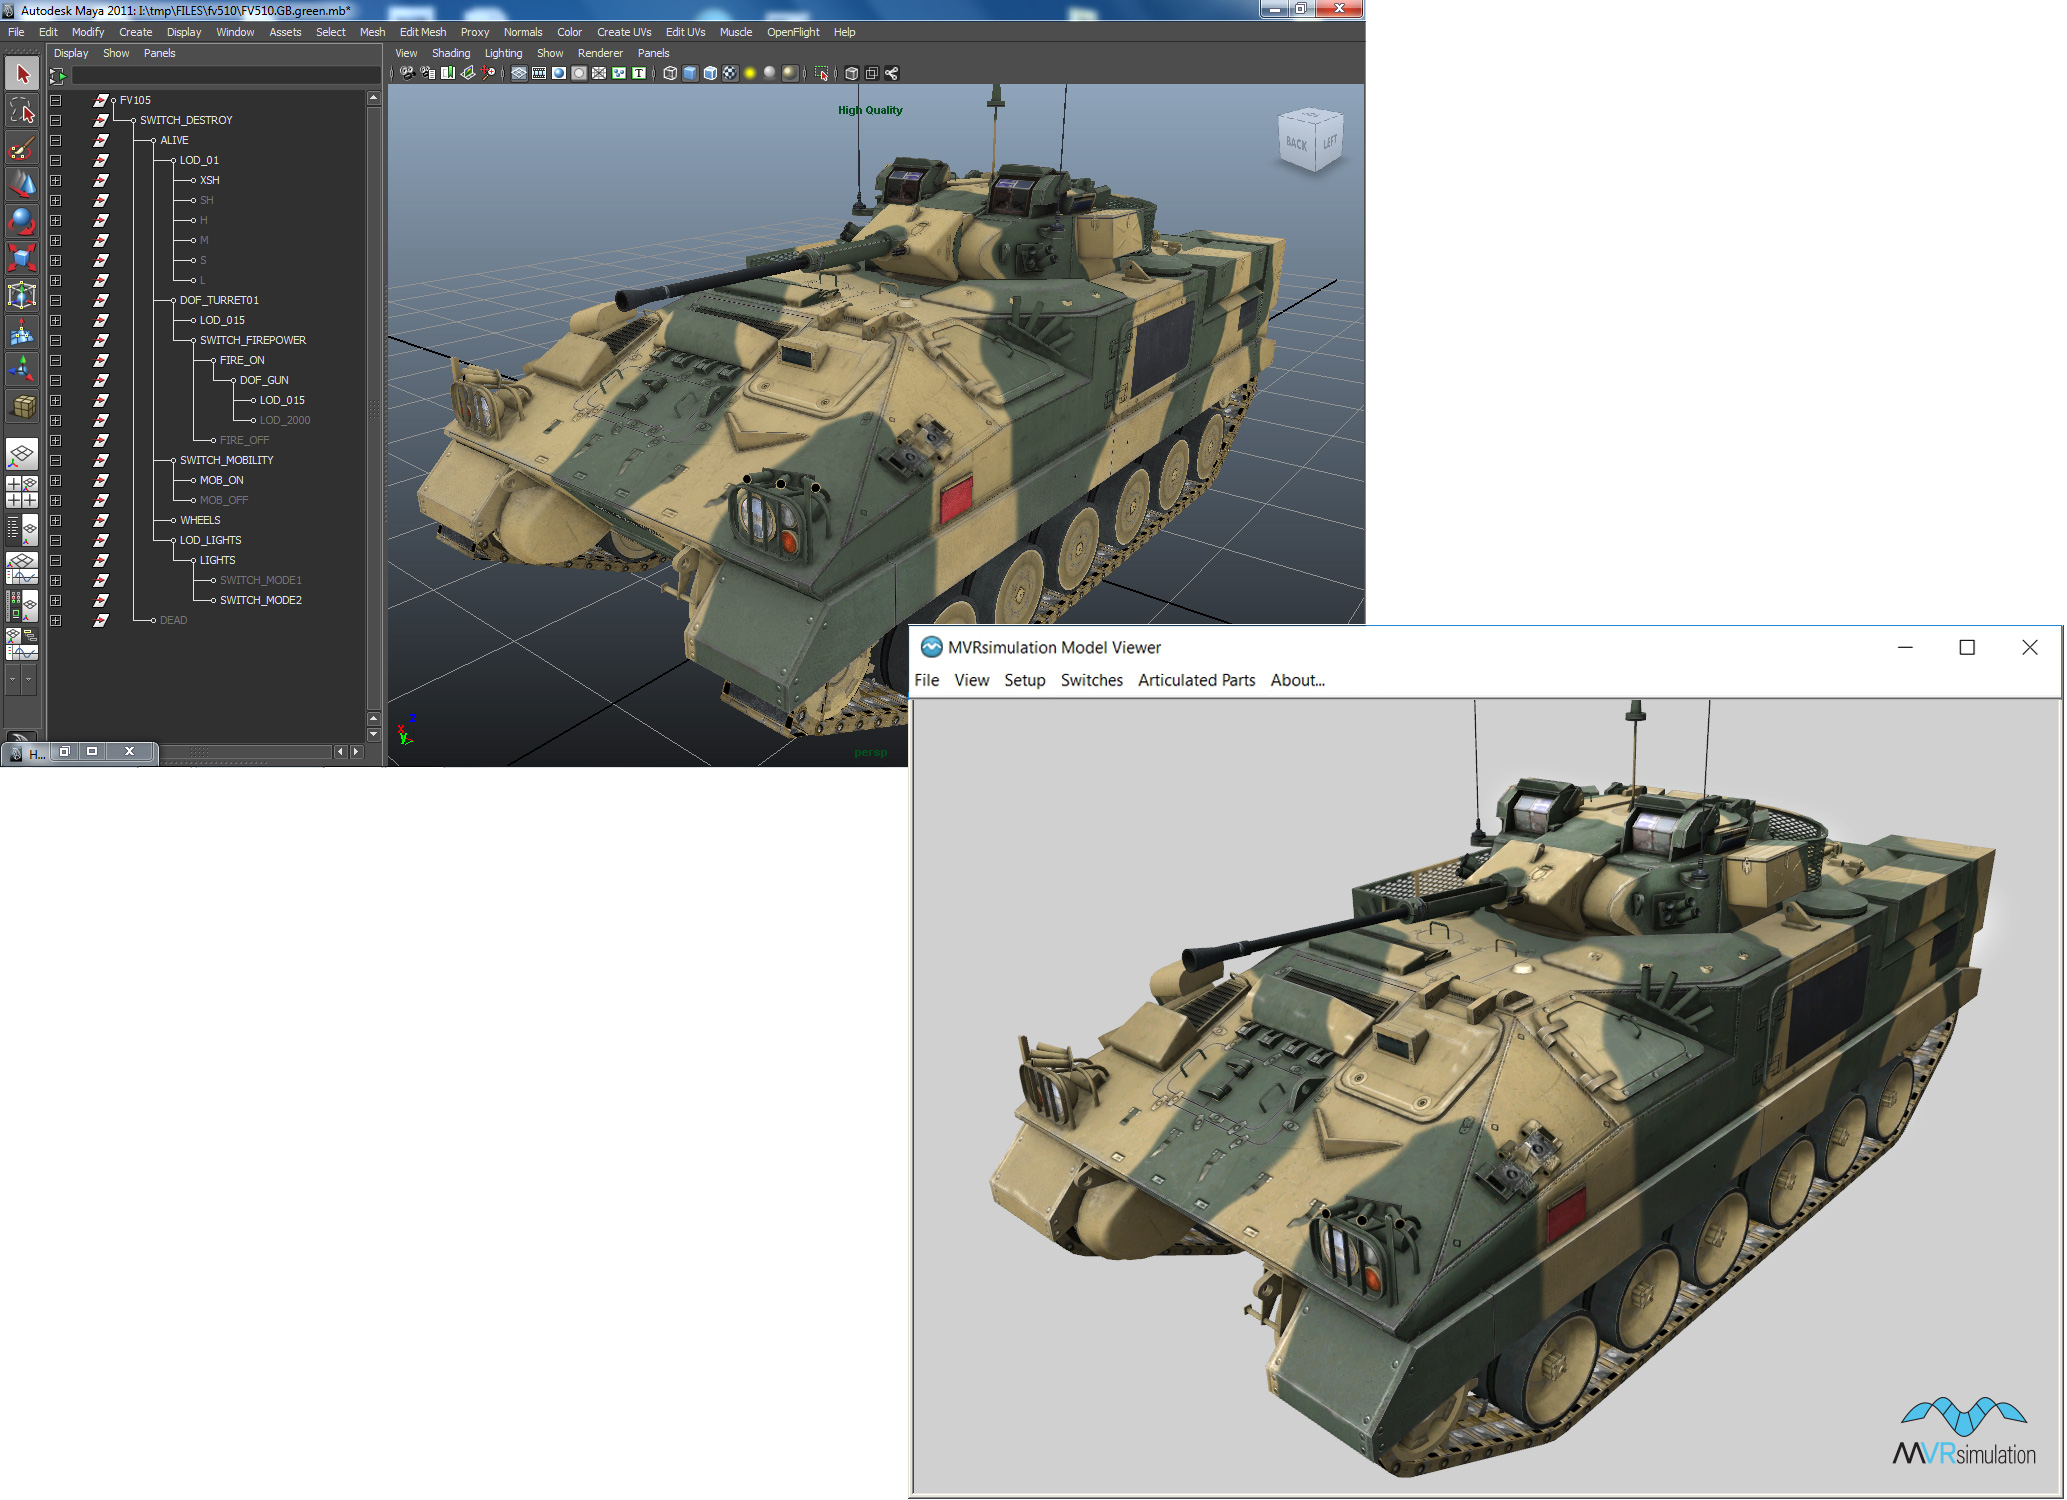 MVRsimulation's FV510 model, in AutoDesk's Maya modeling tool, prior to exporting it in FBX format for conversion to MVRsimulation's model format, and resulting converted model in MVRsimulation's Model Viewer.